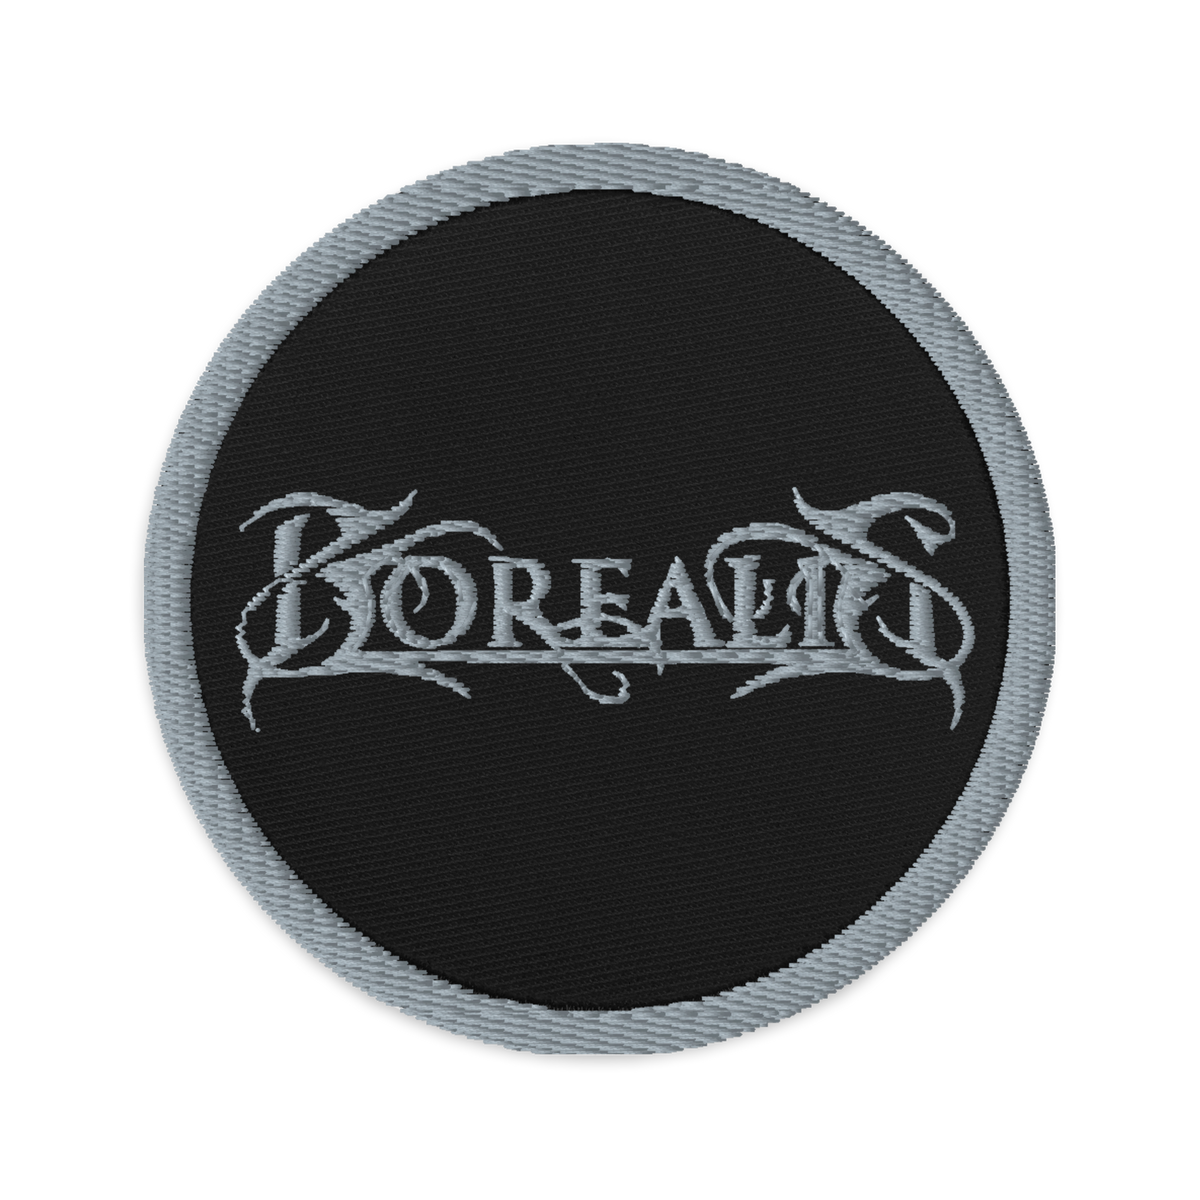 Borealis Embroidered Patch - Grey